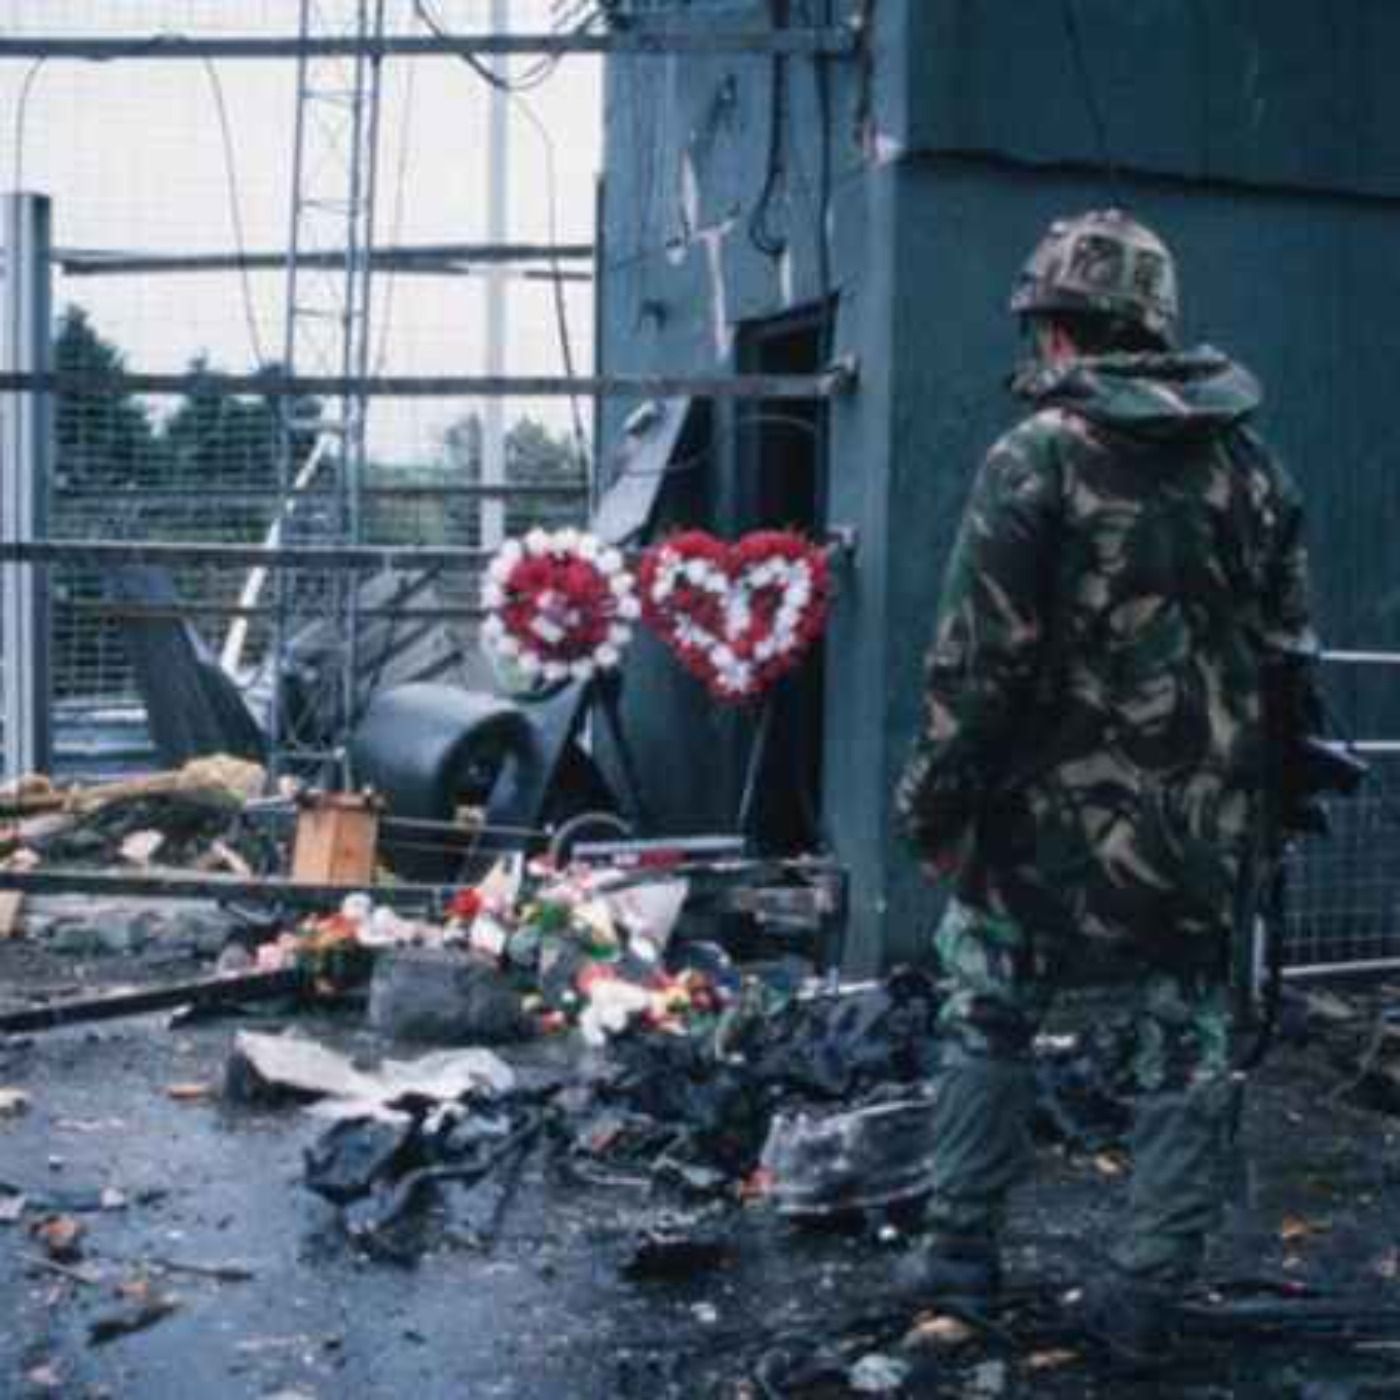 The Proxy Bomb Campaign of The IRA